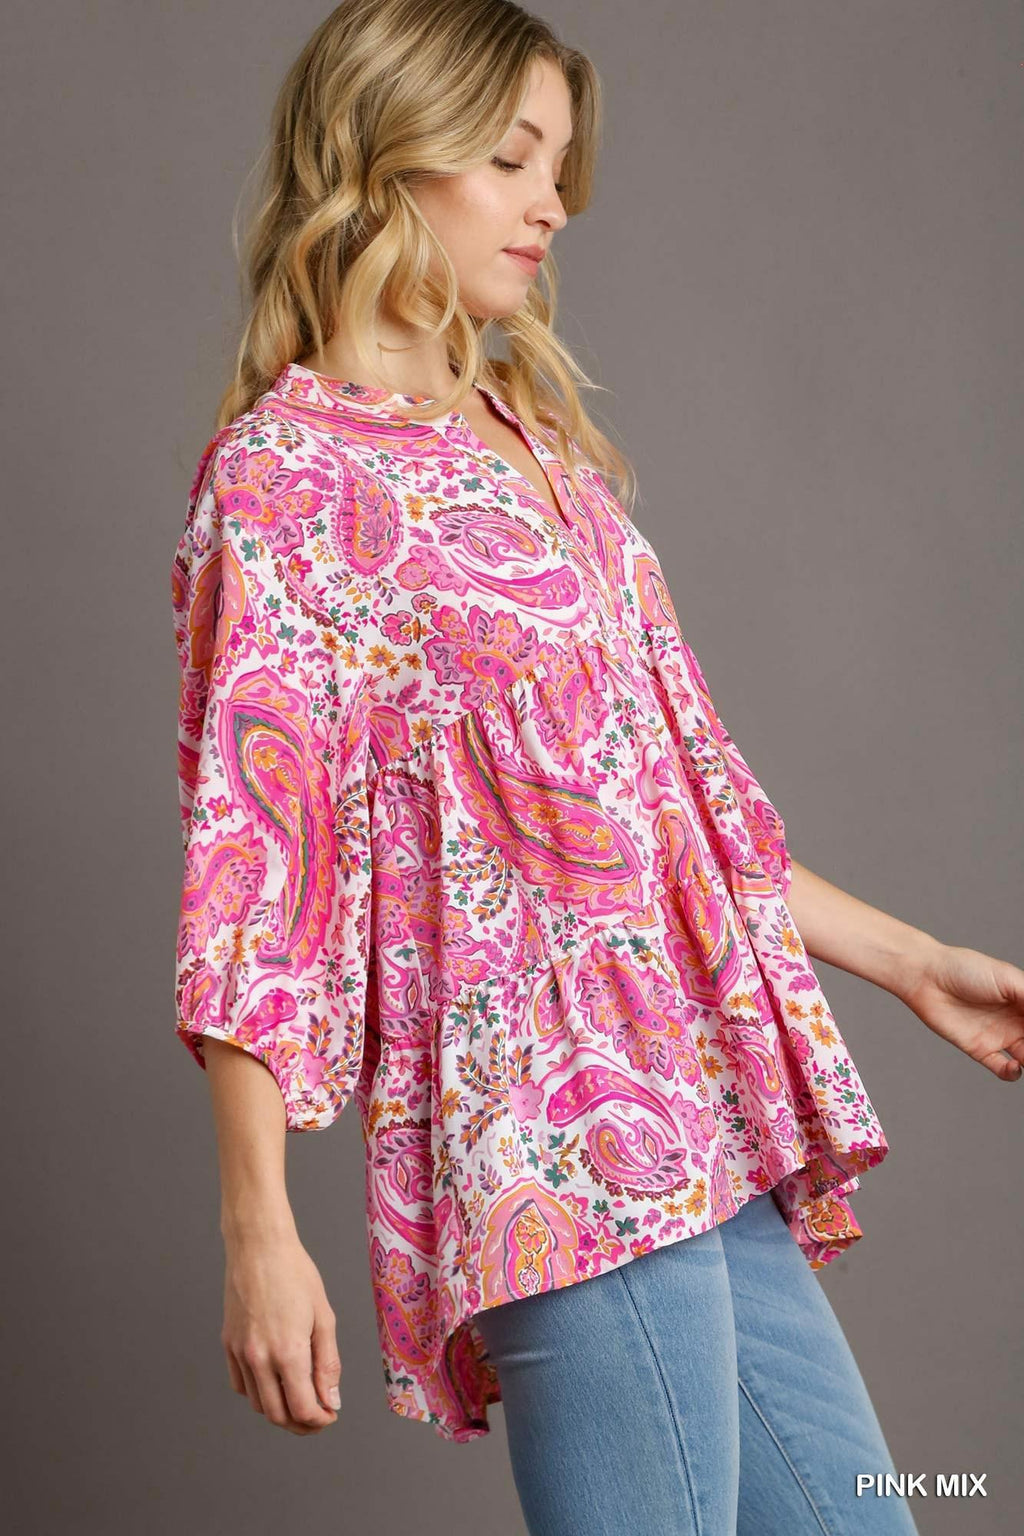 Pink Paisley Cuffed Short Sleeve Top by Umgee